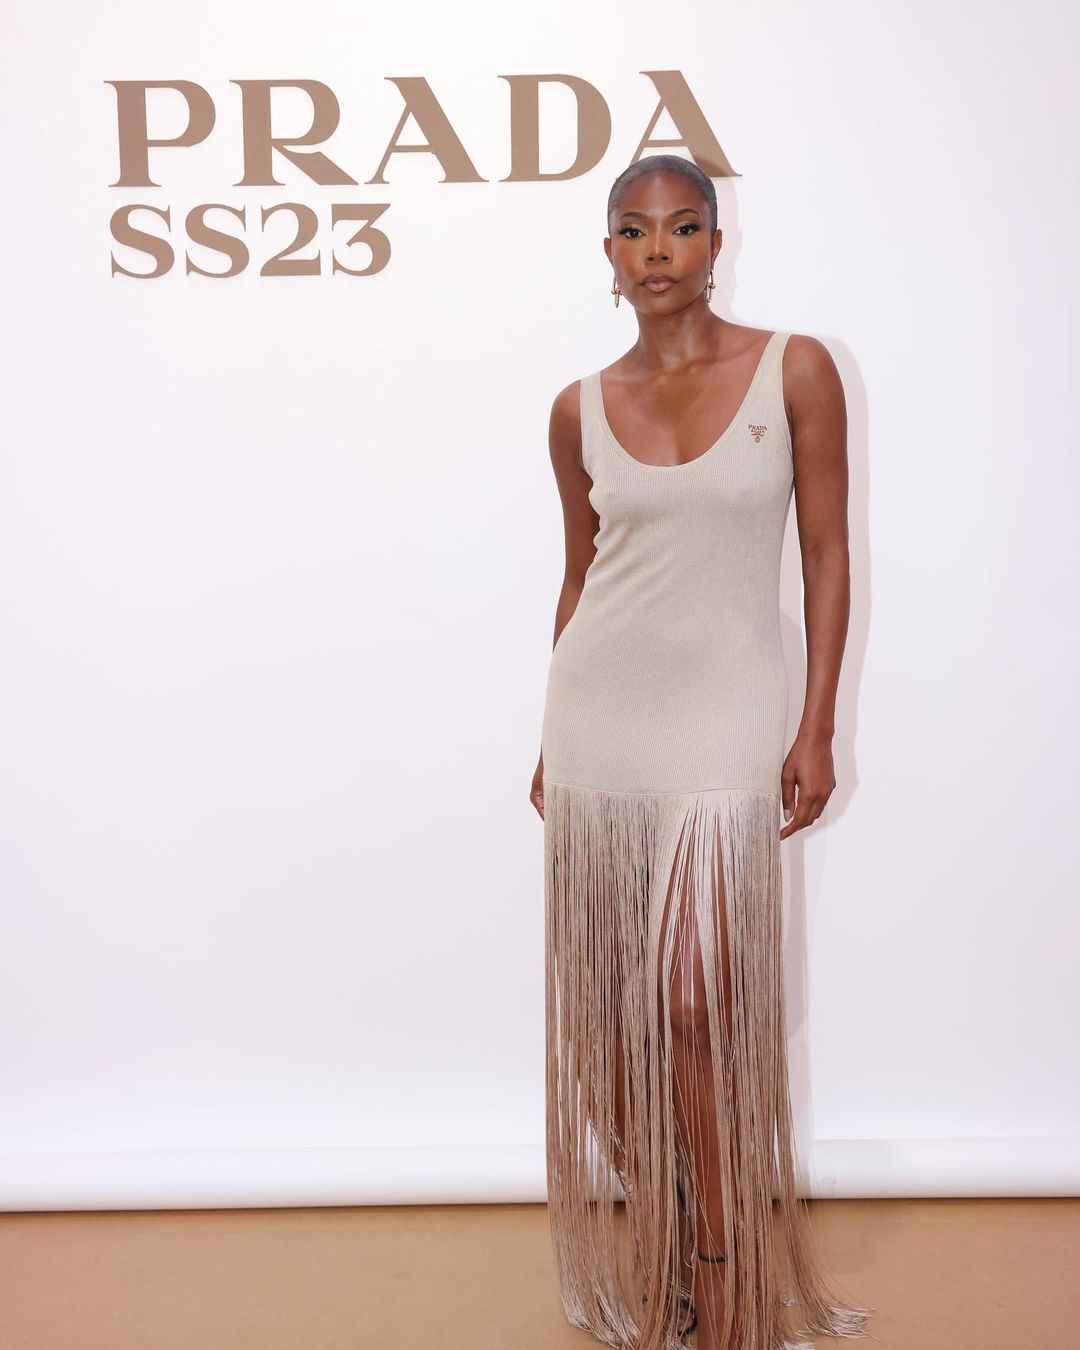 gabrielle-union-last-week-stylish-celebs-opted-for-polished-urbanity